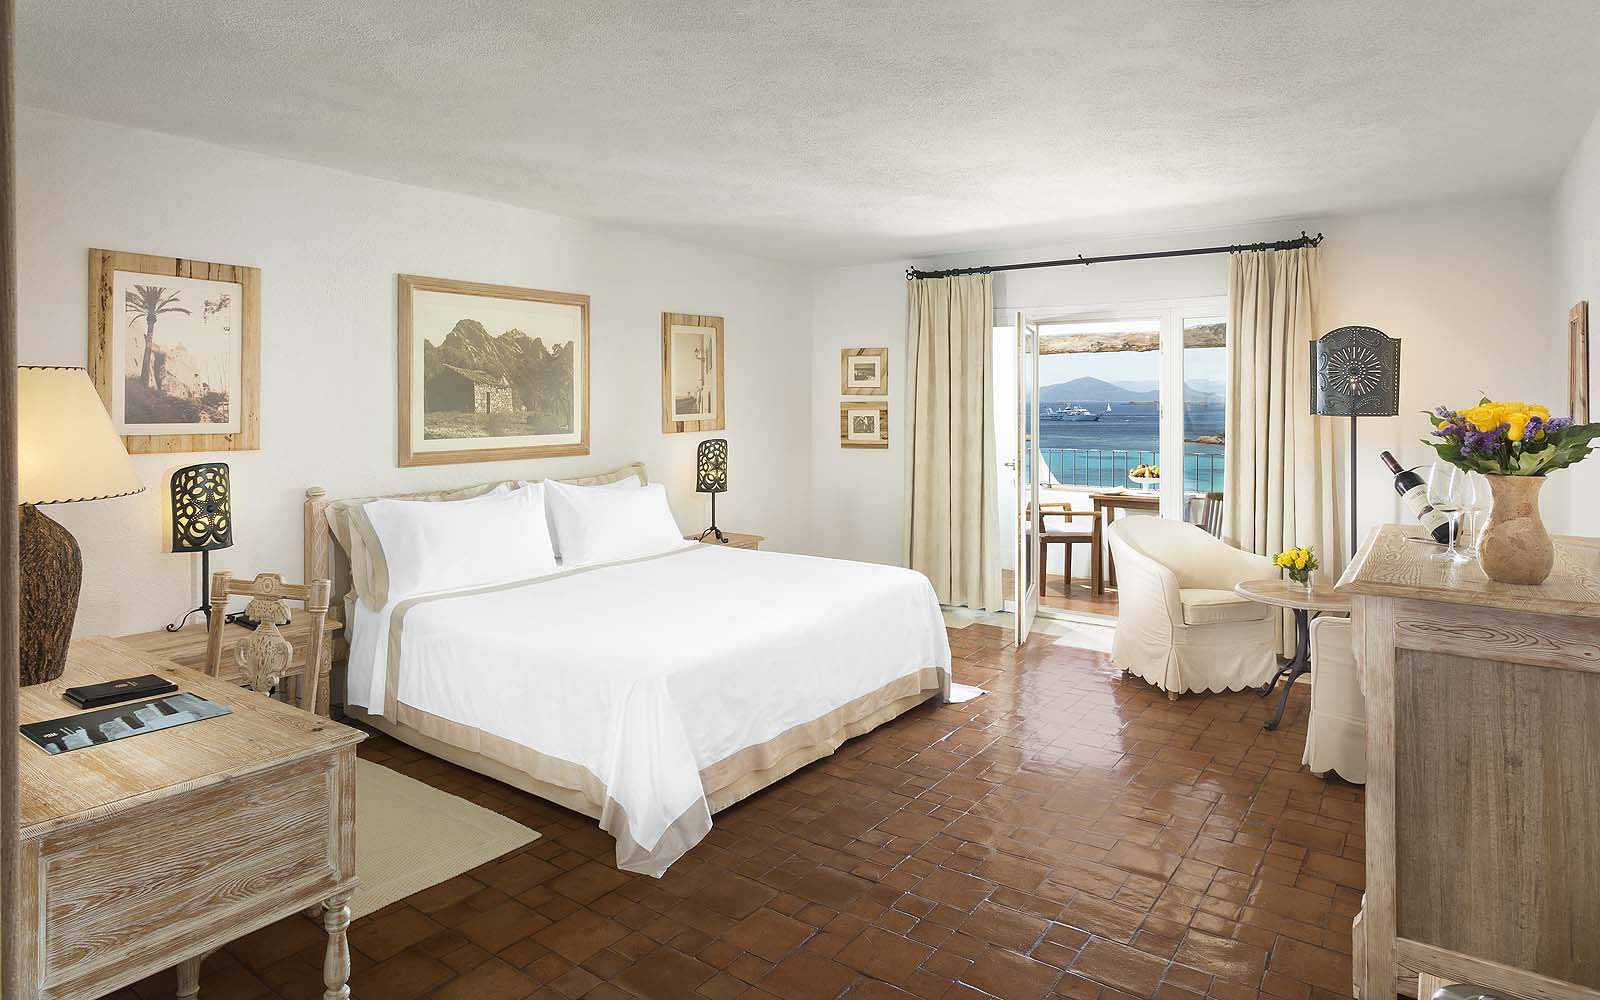 A Deluxe Suite at the Hotel Romazzino